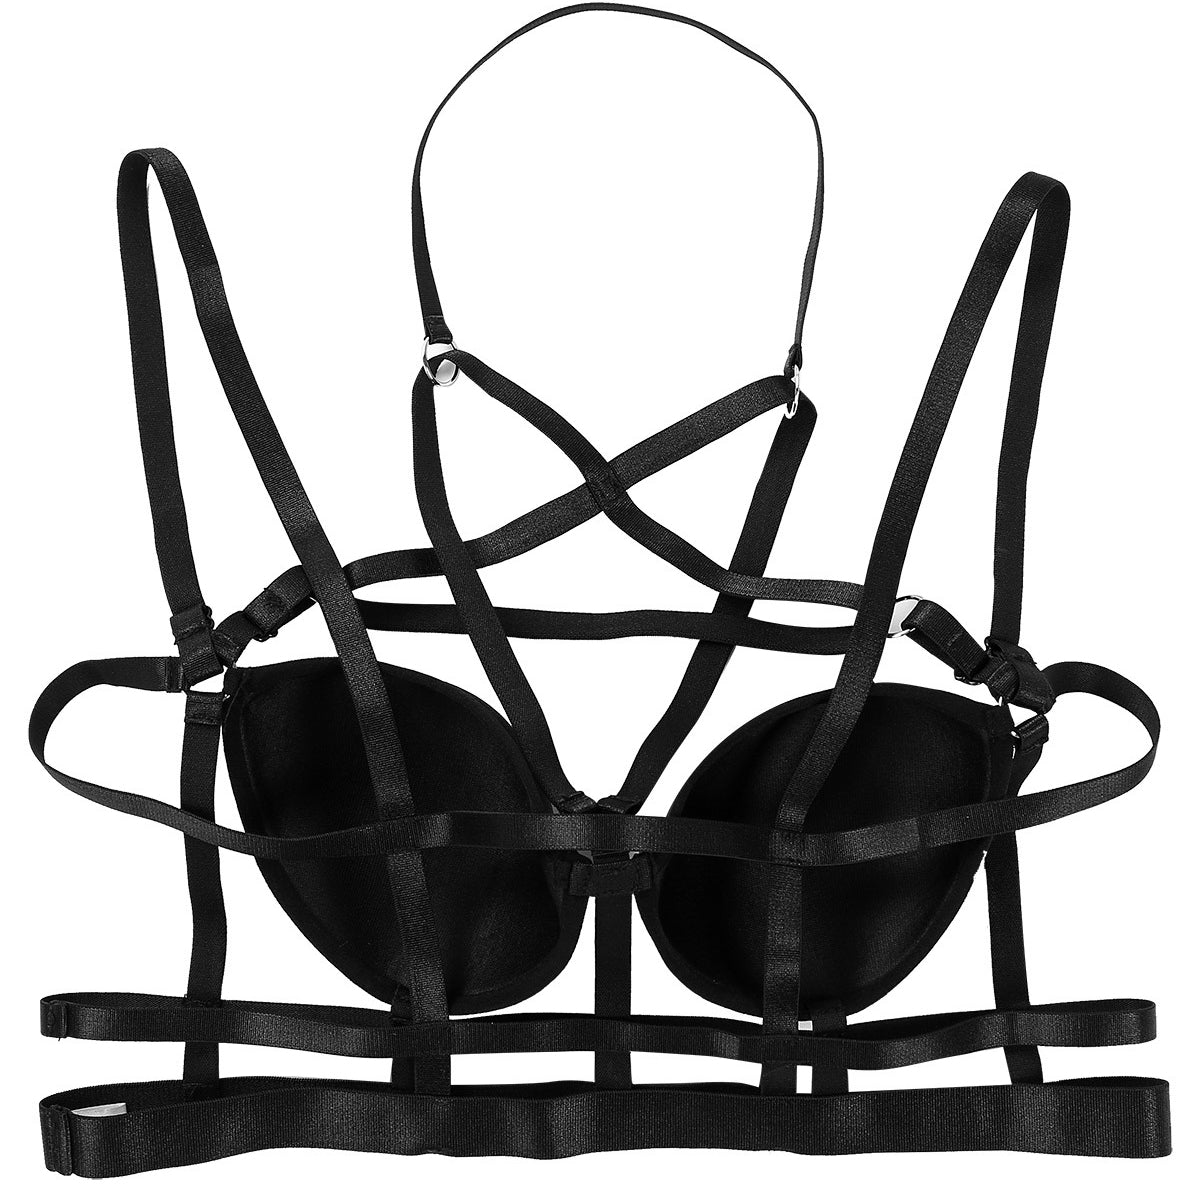 Women's Gothic Body Chest Harness / Lingerie Crop Top Fashion